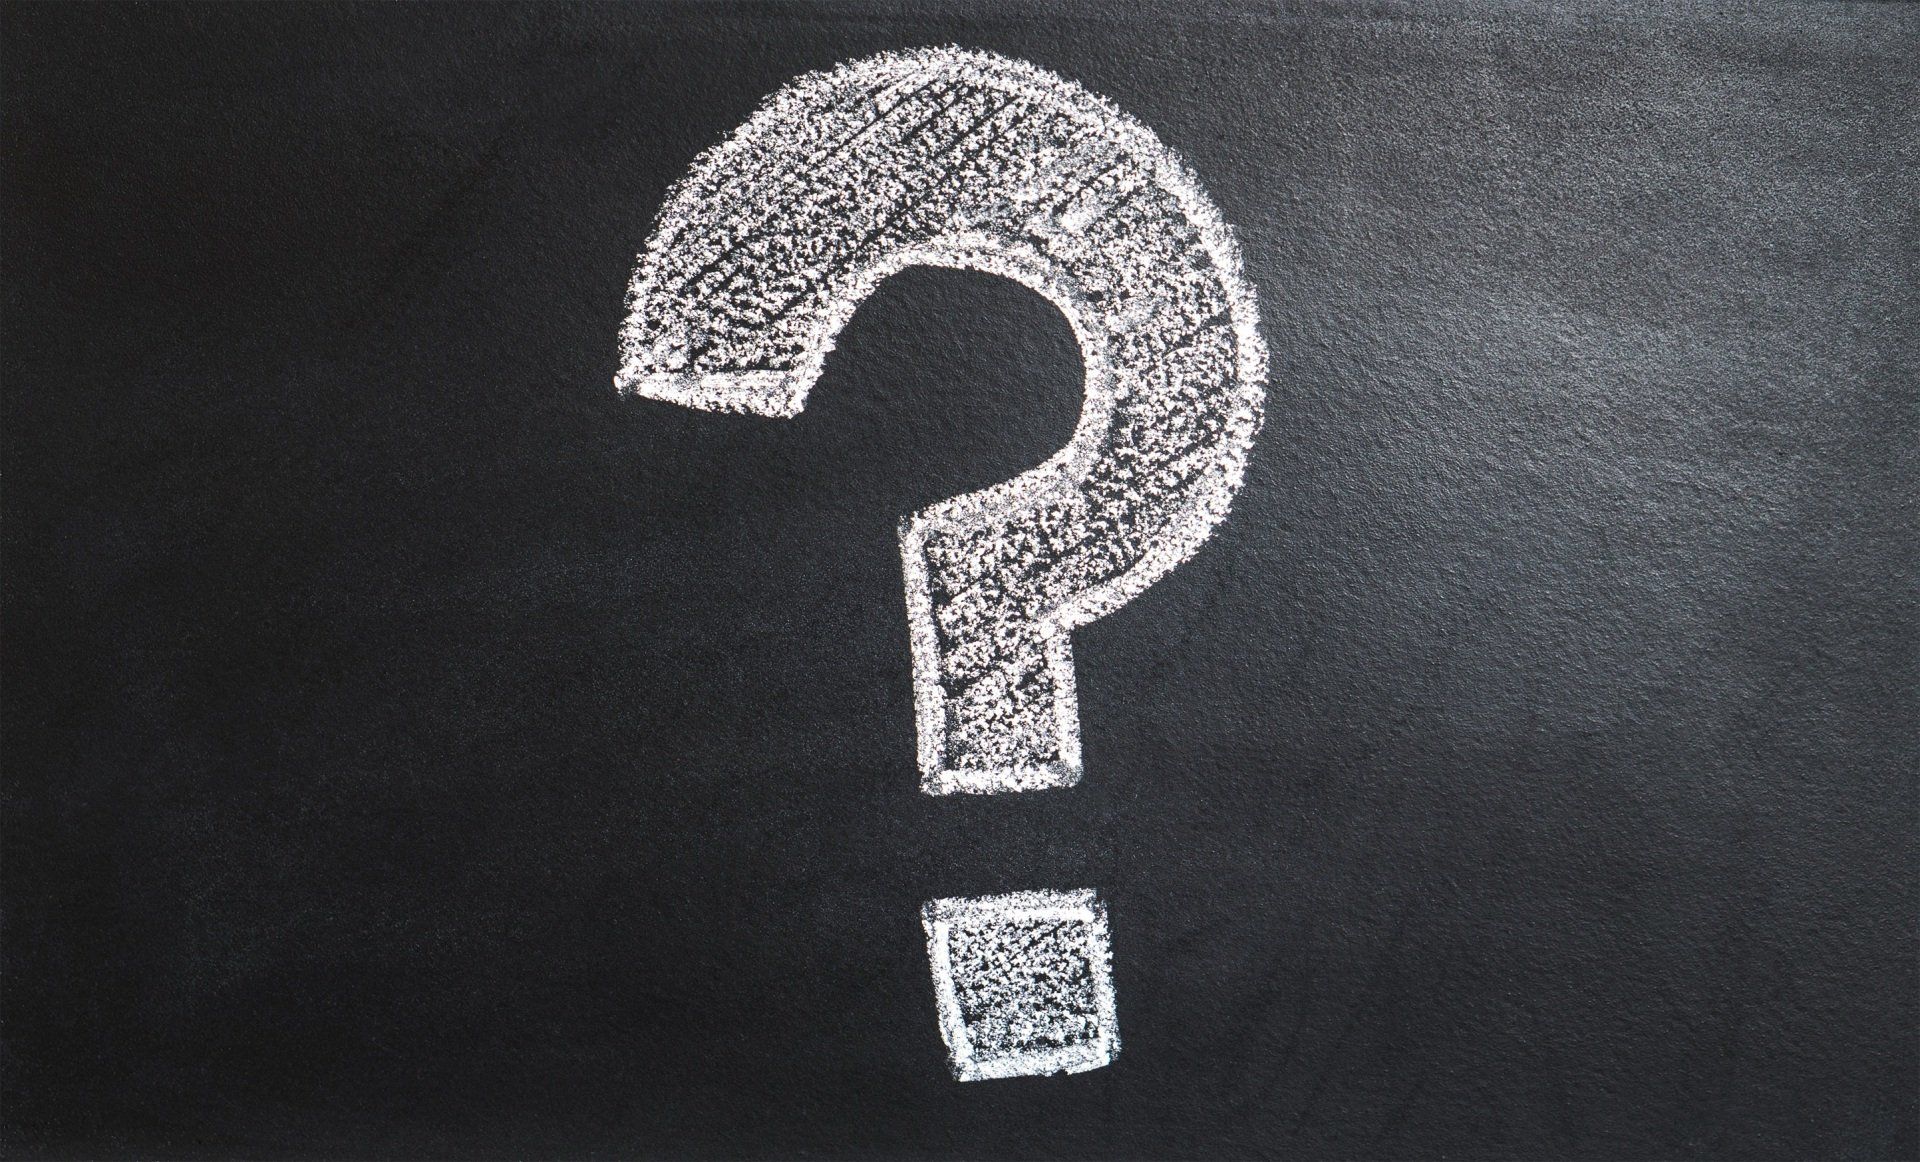 A question mark is drawn on a blackboard with chalk.